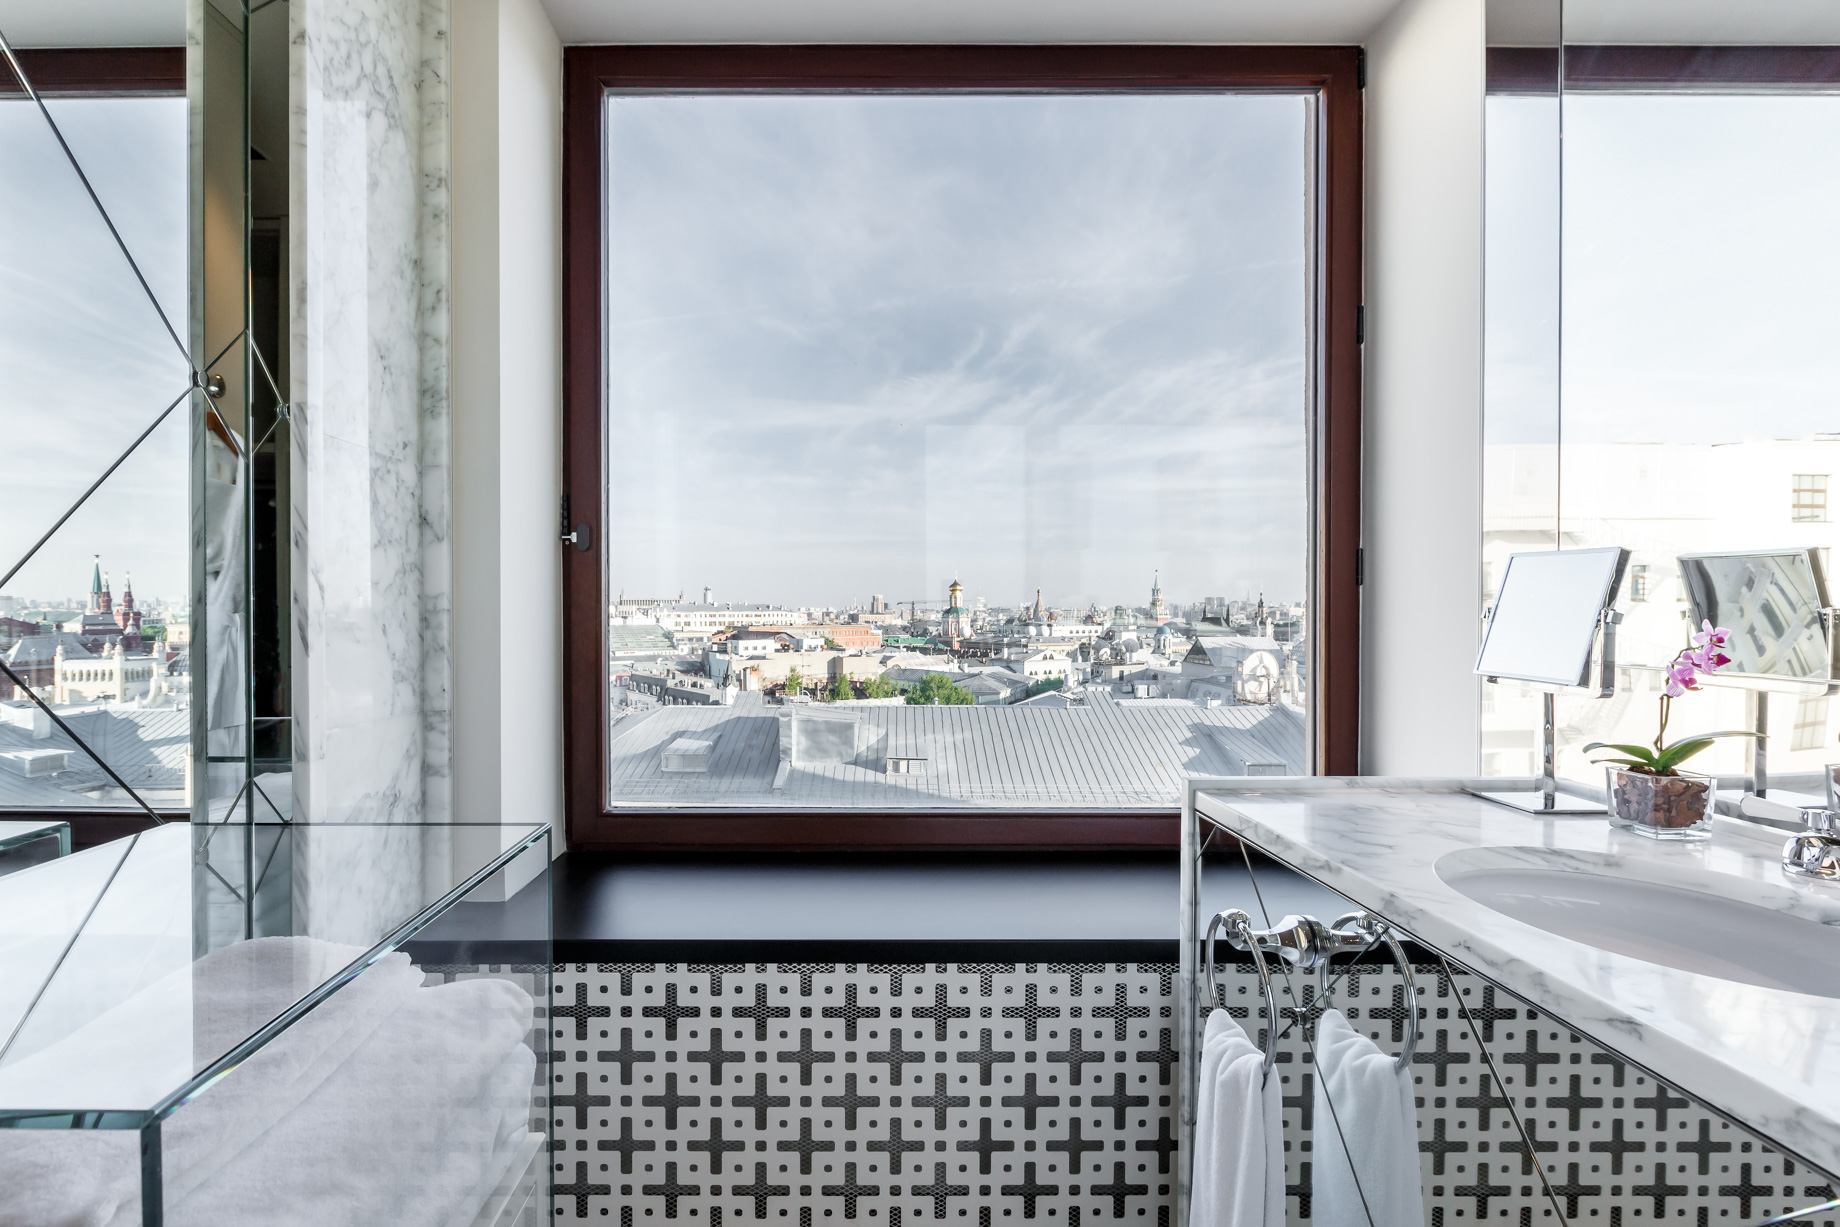 Ararat Park Hyatt Moscow Hotel – Moscow, Russia – Penthouse Suite Bathroom View